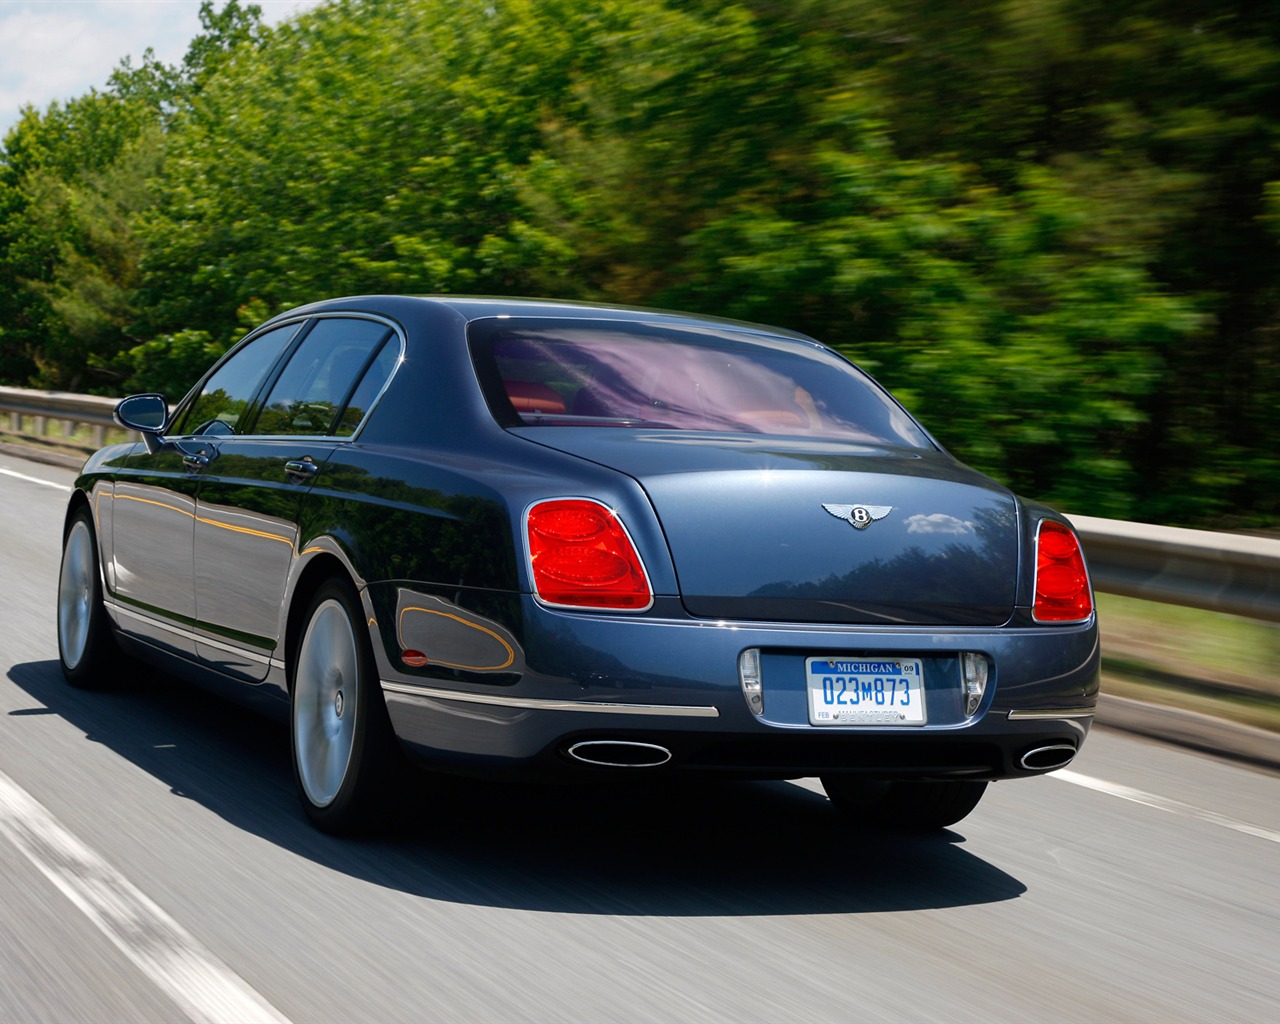 Bentley Continental Flying Spur Speed - 2008 宾利12 - 1280x1024